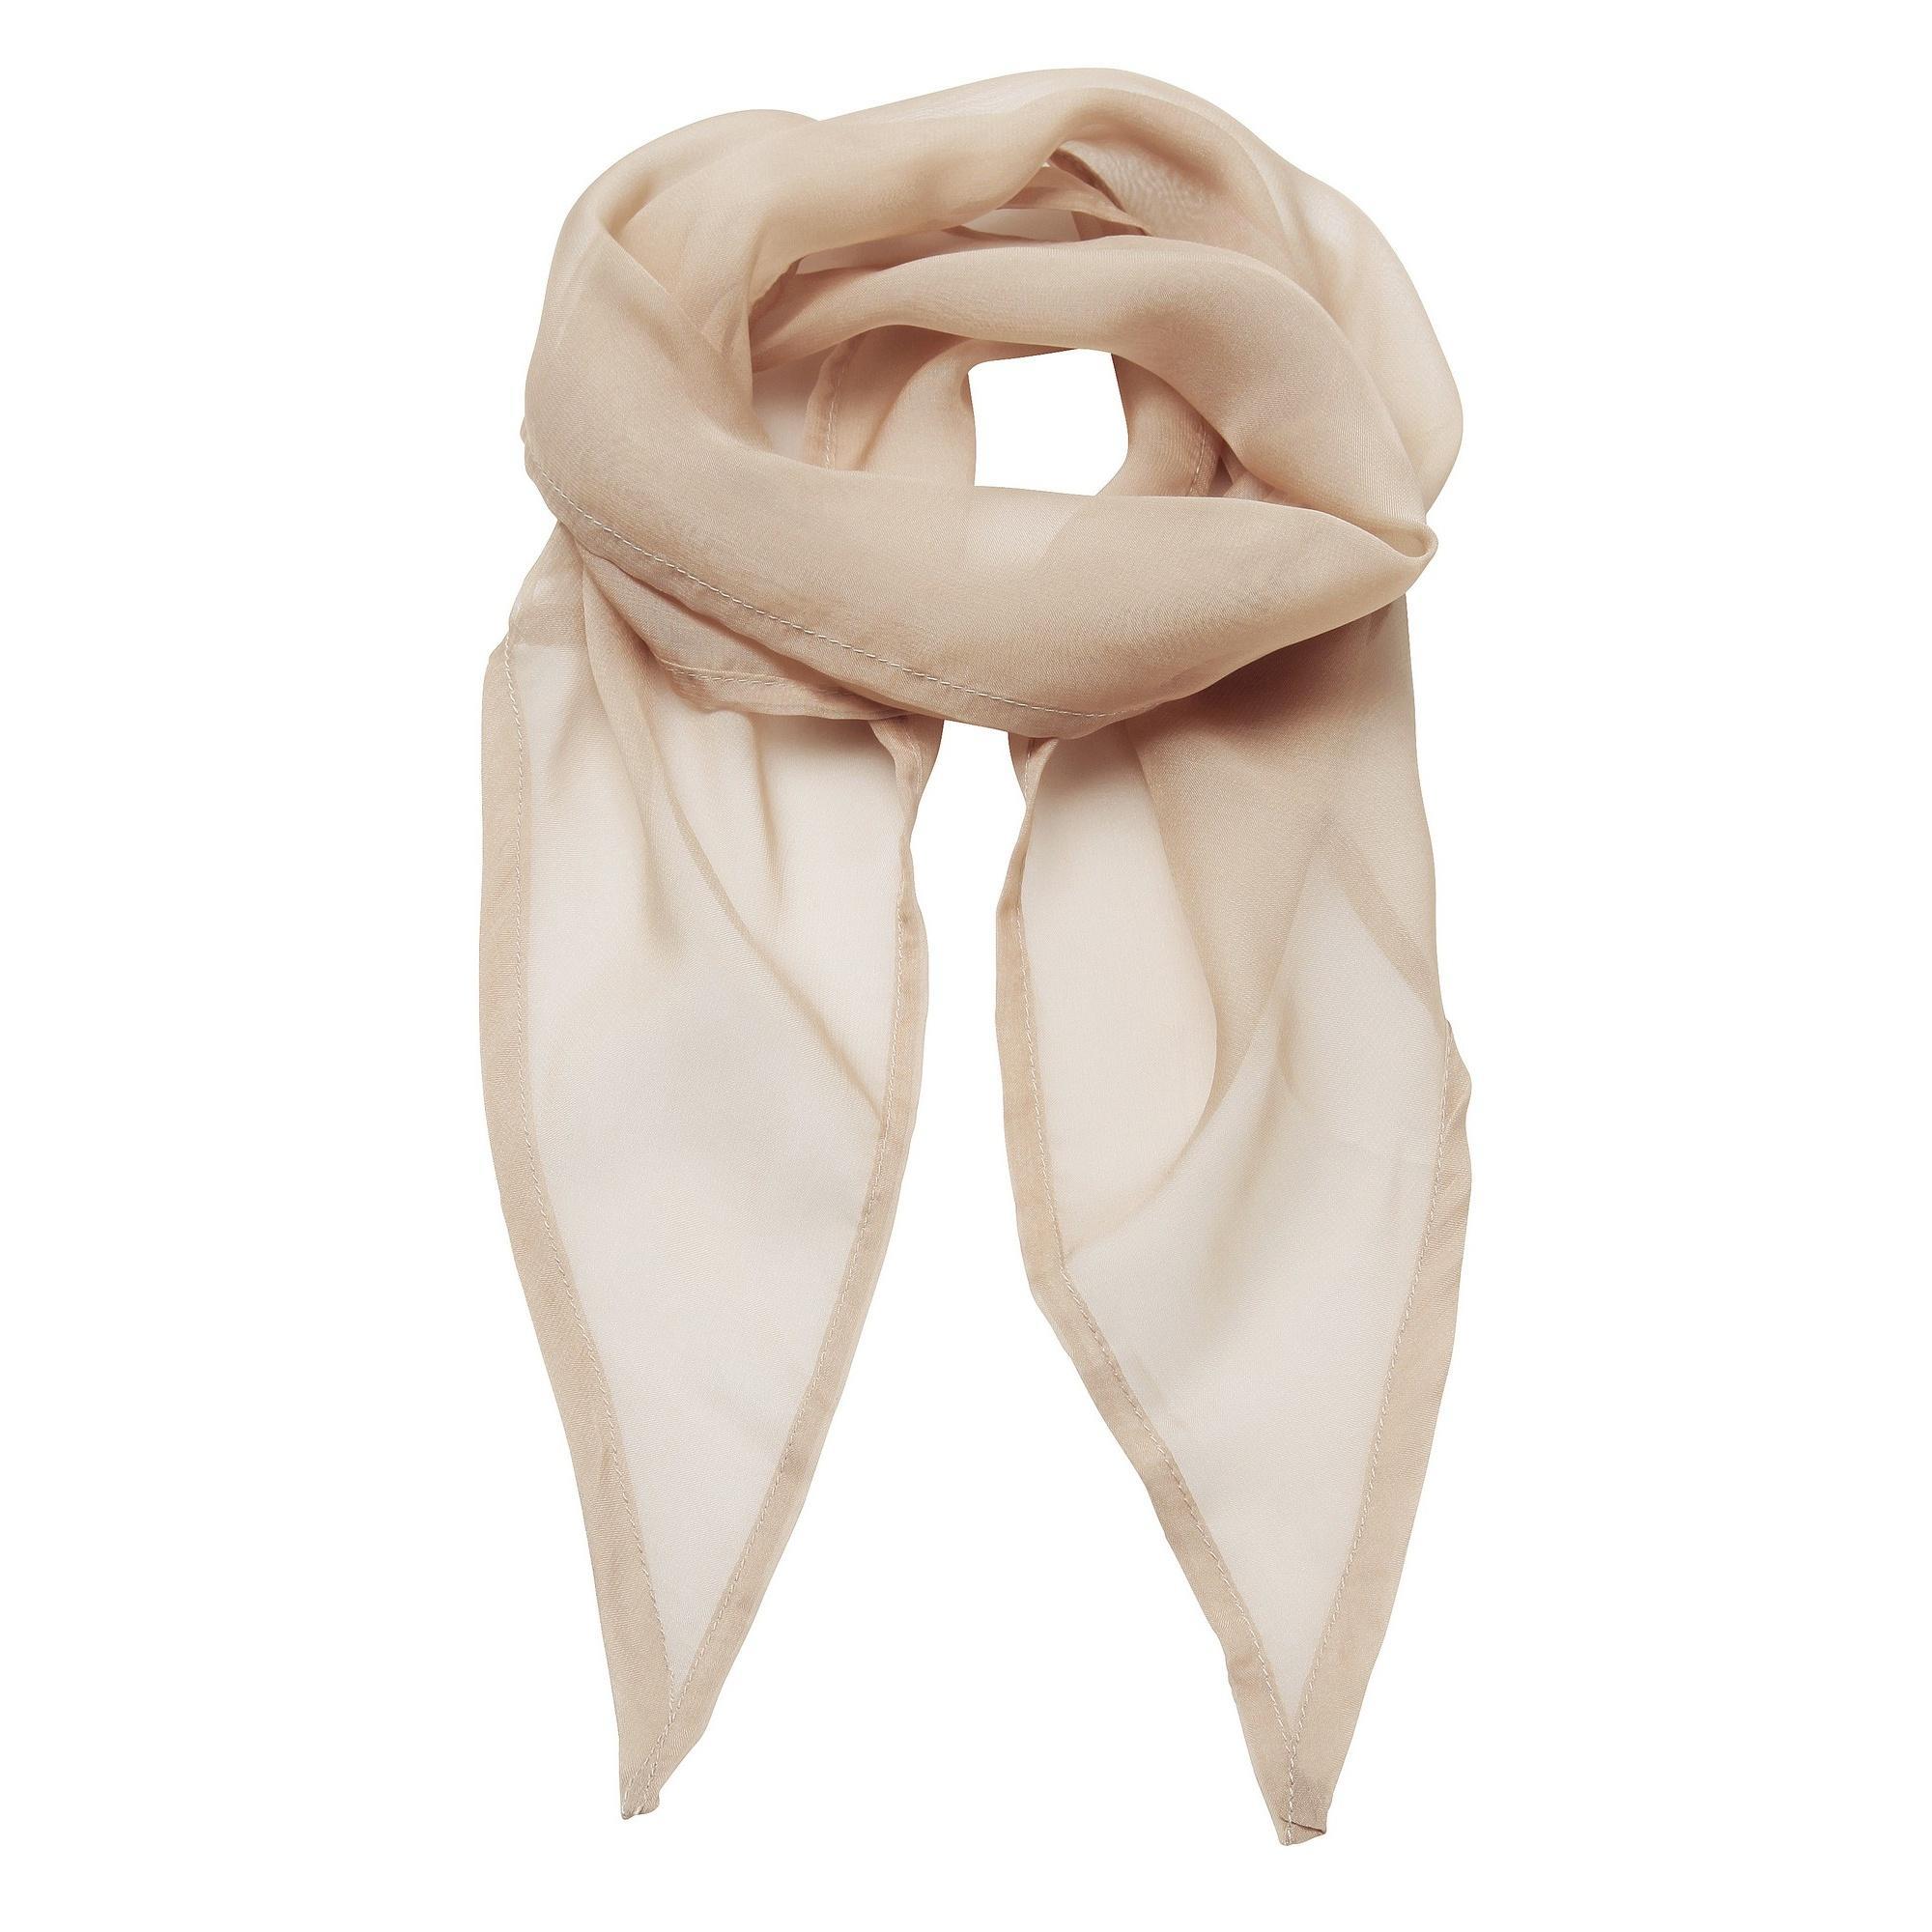 Premier Ladies/Womens Work Chiffon Formal Scarf (Natural) (One Size)